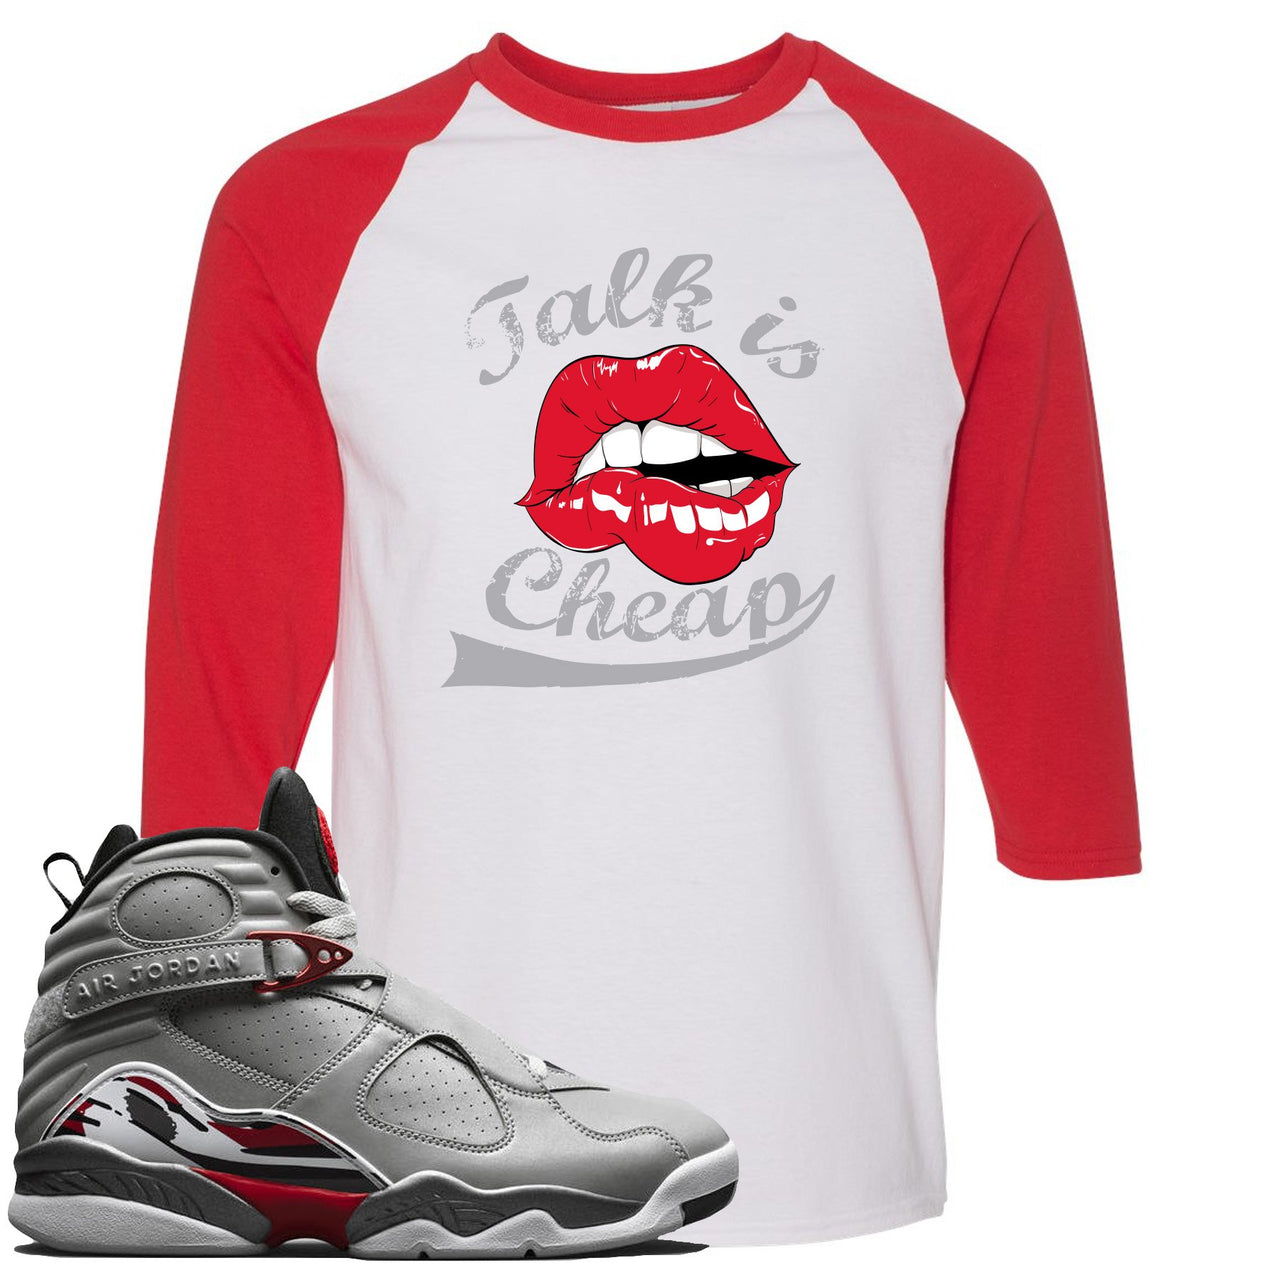 Reflections of a Champion 8s Raglan T Shirt | Talking Lips, White and Red